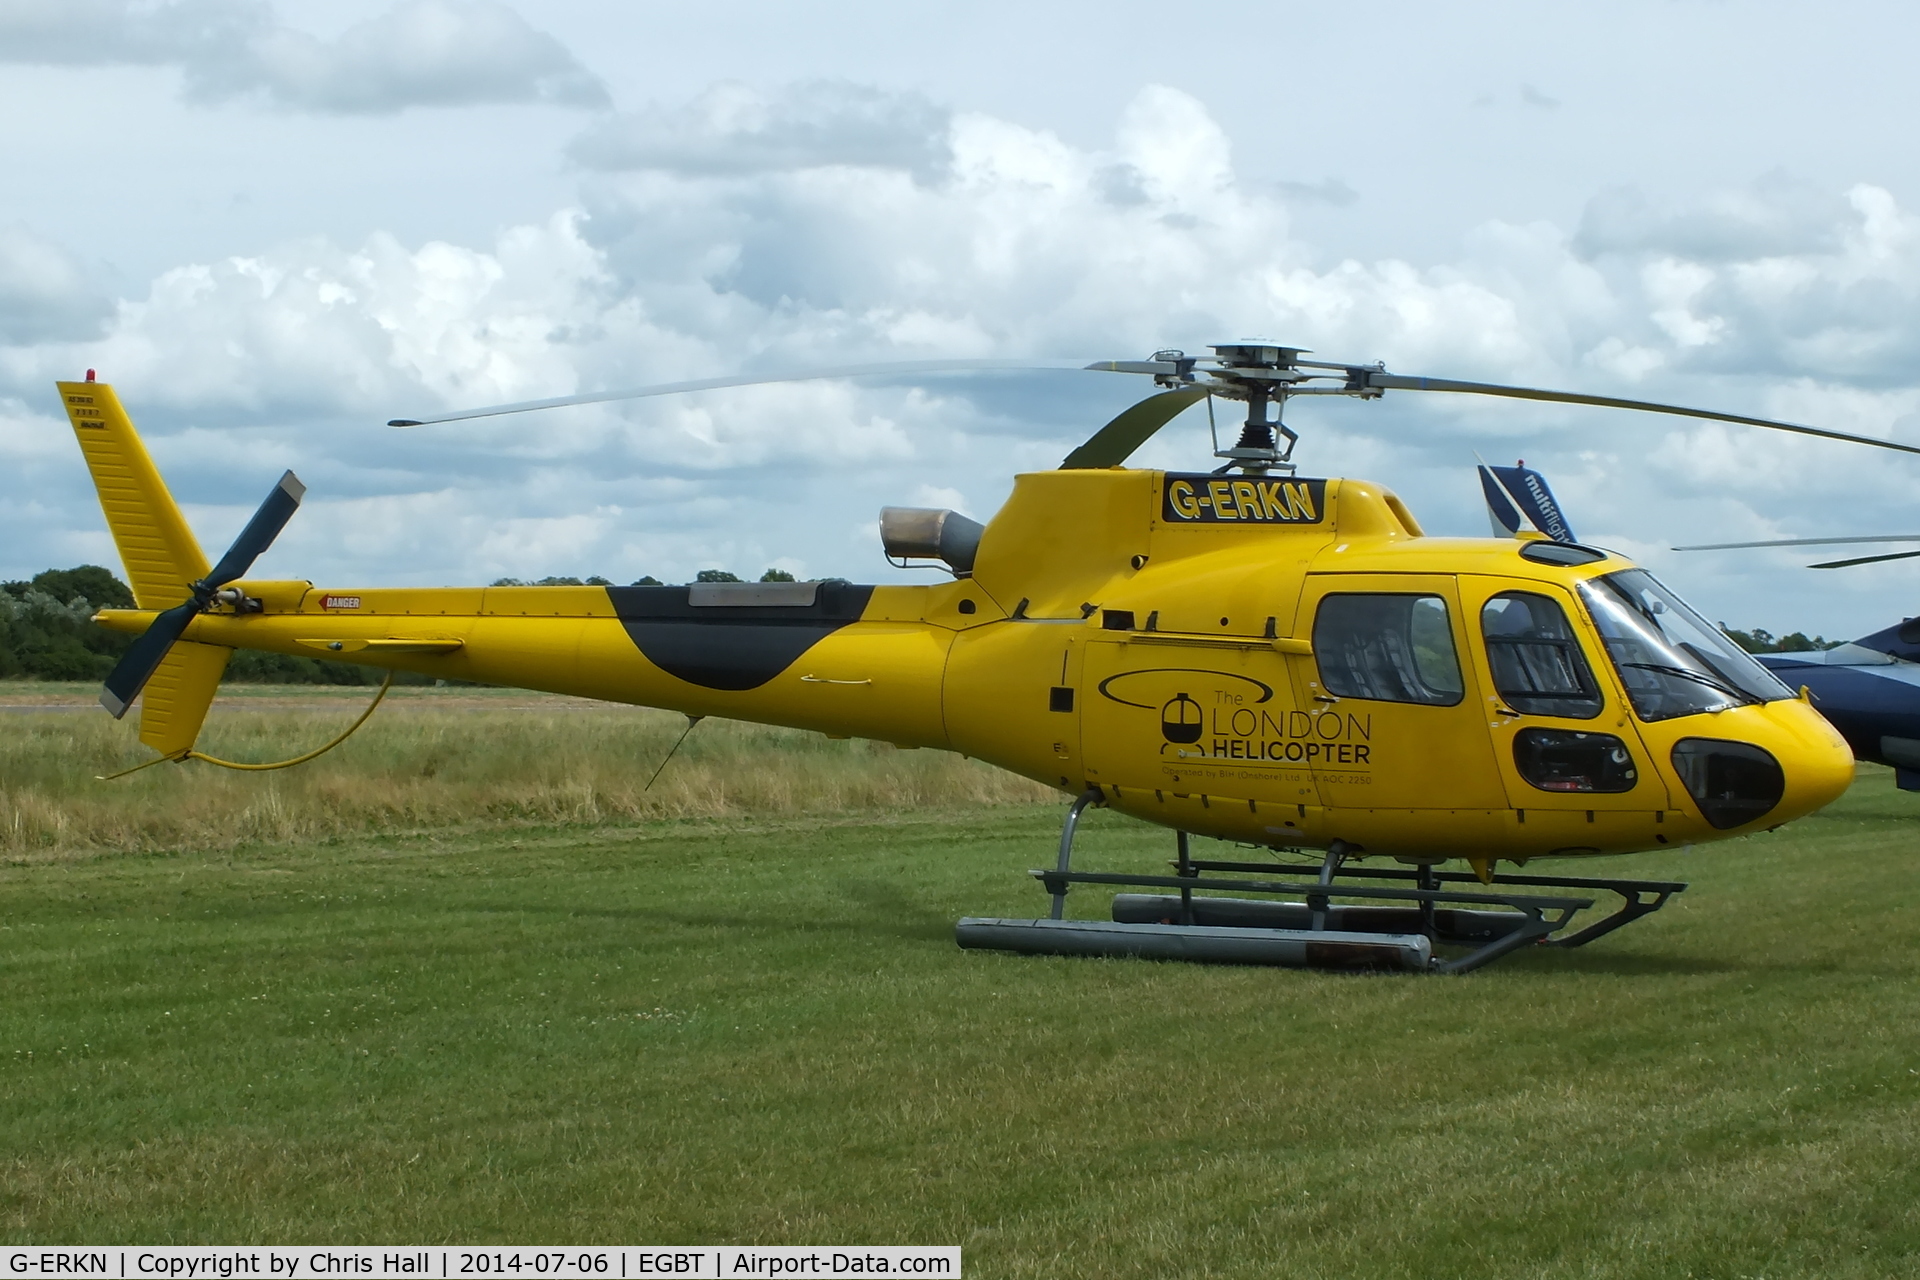 G-ERKN, 2002 Eurocopter AS-350B-3 Ecureuil Ecureuil C/N 3587, ferrying race fans to the British F1 Grand Prix at Silverstone